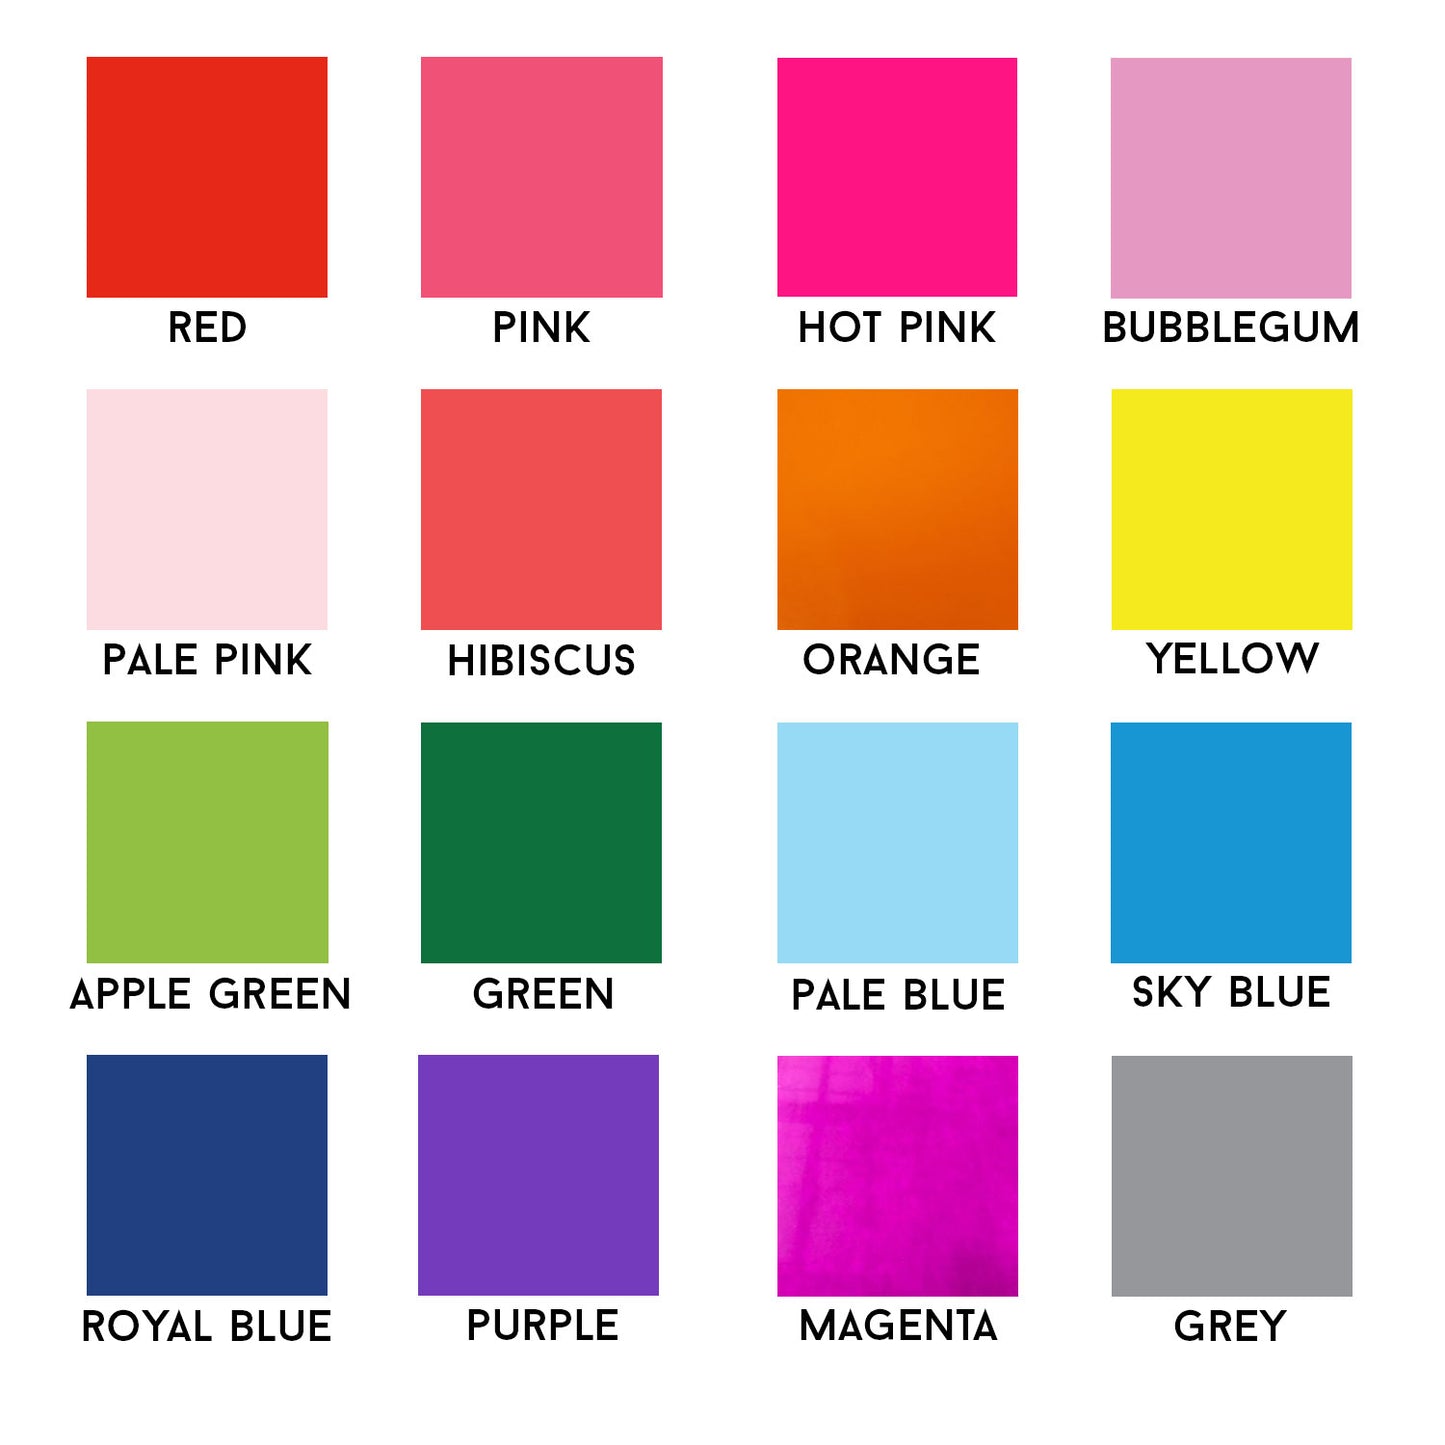 Swatches of the vinyl color options. In order they are red, pink, hot pink, bubblegum, pale pink, hibiscus, orange, yellow, apple green, green, pale blue, sky blue, royal blue, purple, magenta, grey